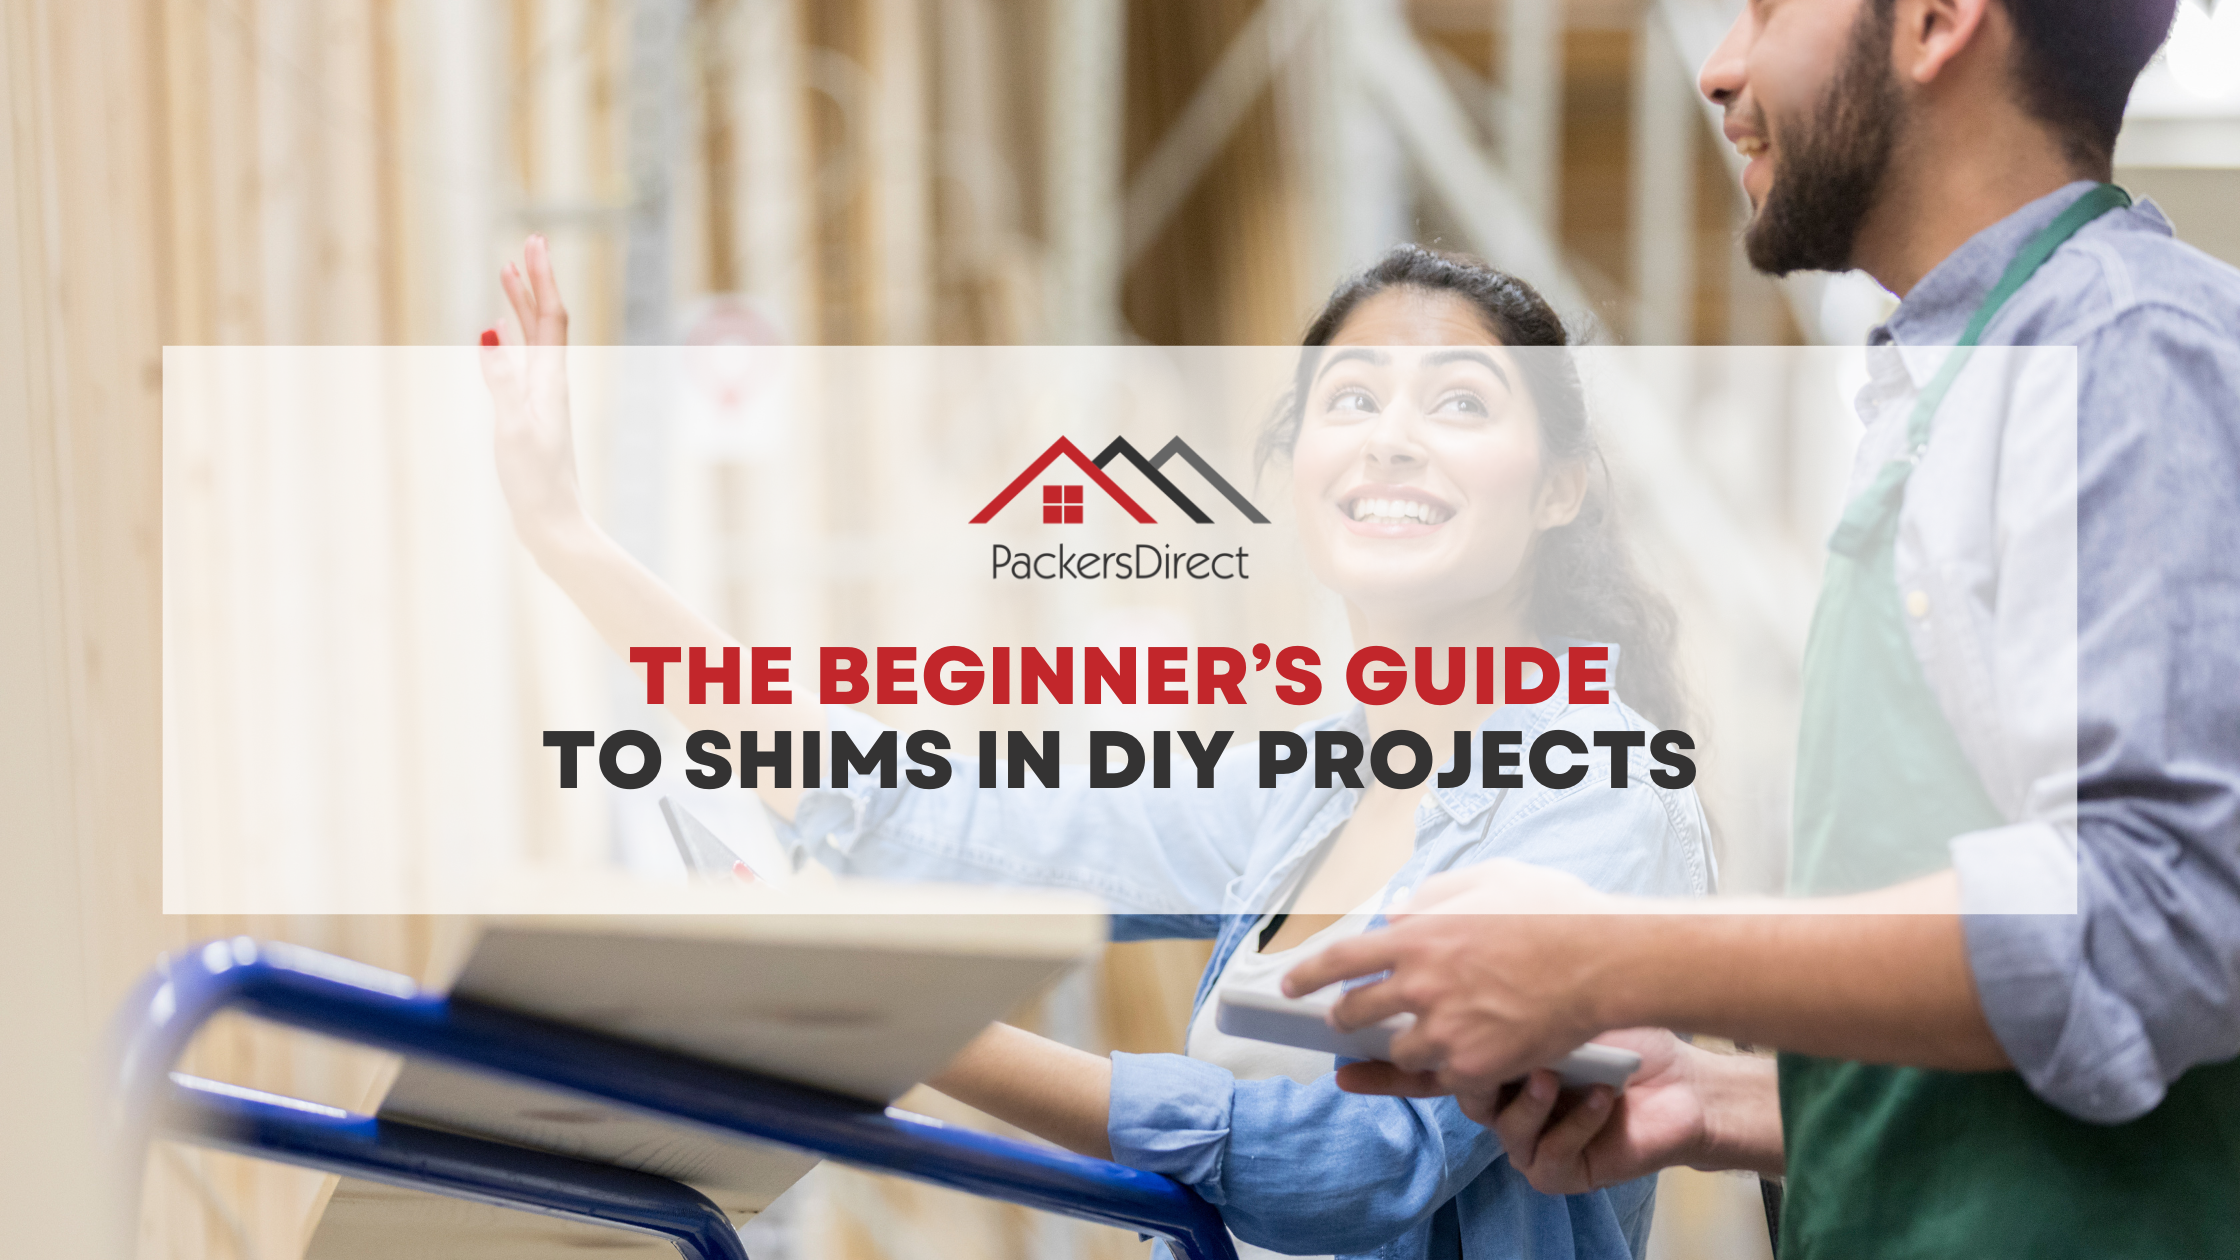 The Beginner’s Guide to Shims in DIY Projects